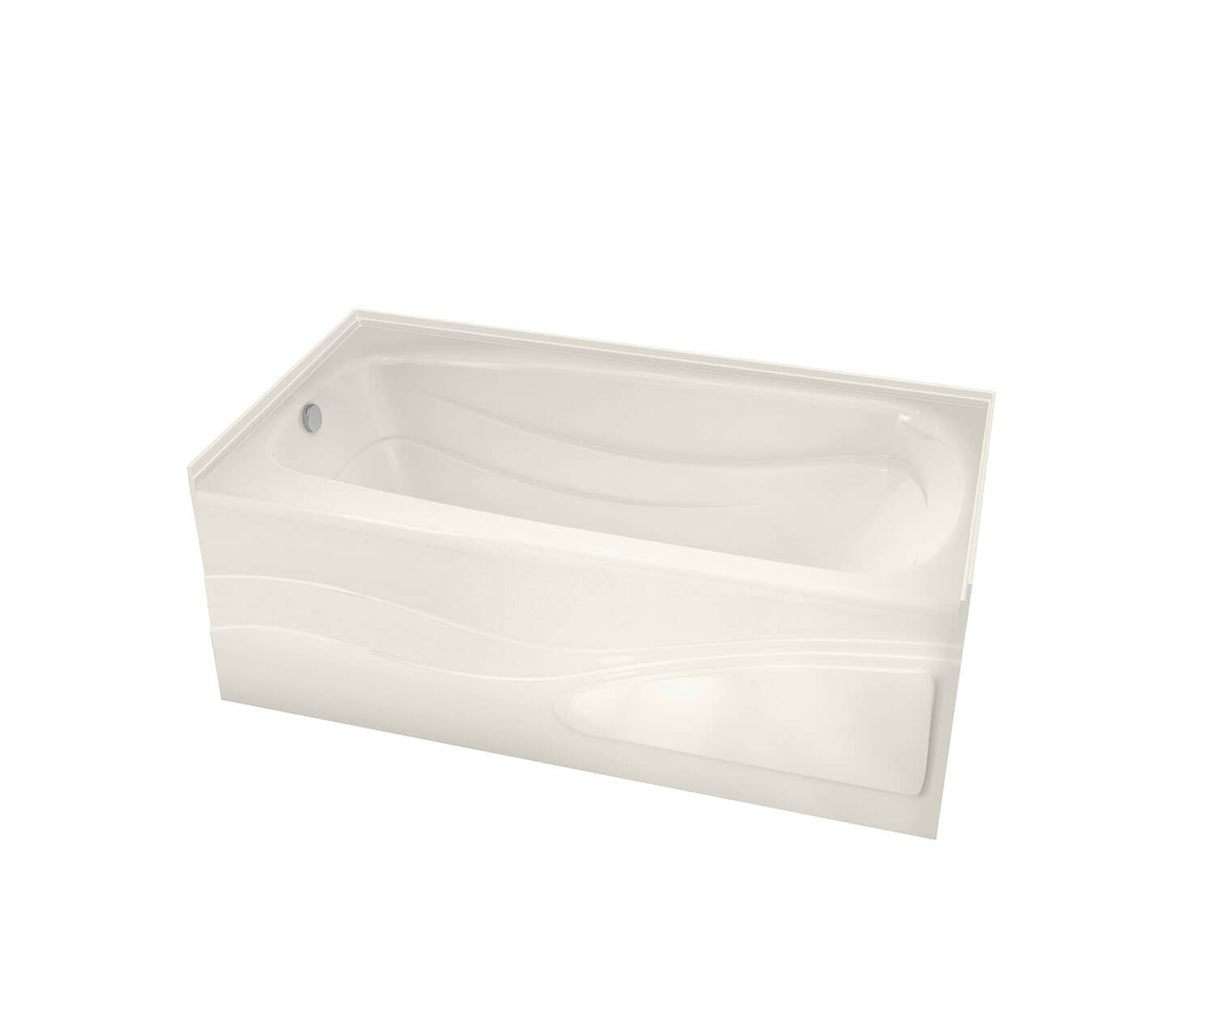 MAAX 102202-R-097-007 Tenderness 6036 Acrylic Alcove Right-Hand Drain Combined Whirlpool & Aeroeffect Bathtub in Biscuit